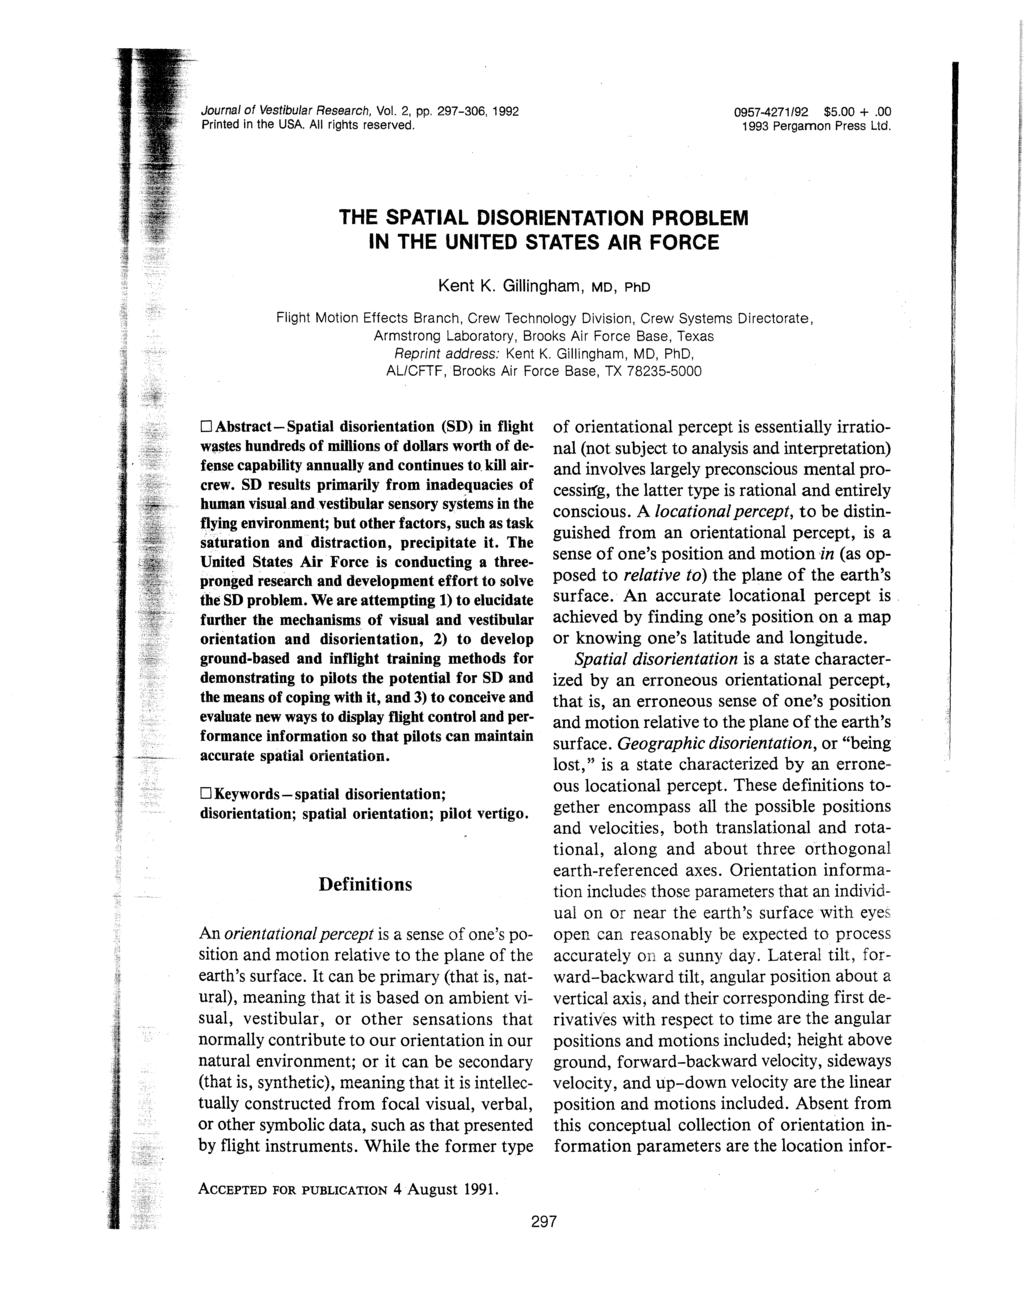 Journal of Vestibular Research, Vol. 2, pp. 297-306, 1992 Printed in the USA. All rights reserved. 0957-4271/92 $5.00 +.00 1993 Pergamon Press Ltd.